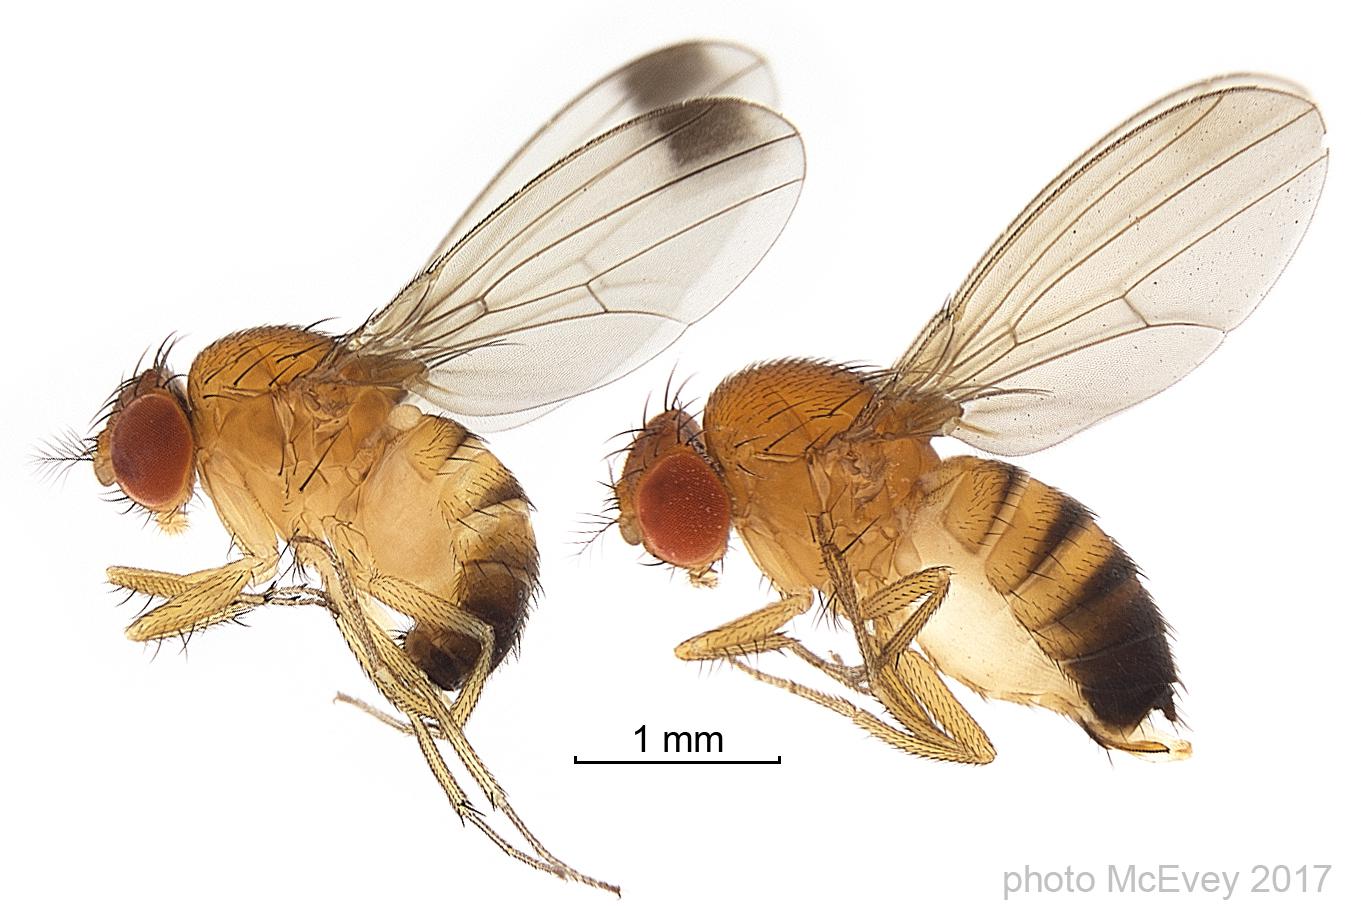 Two drawings of an invasive fly species. 